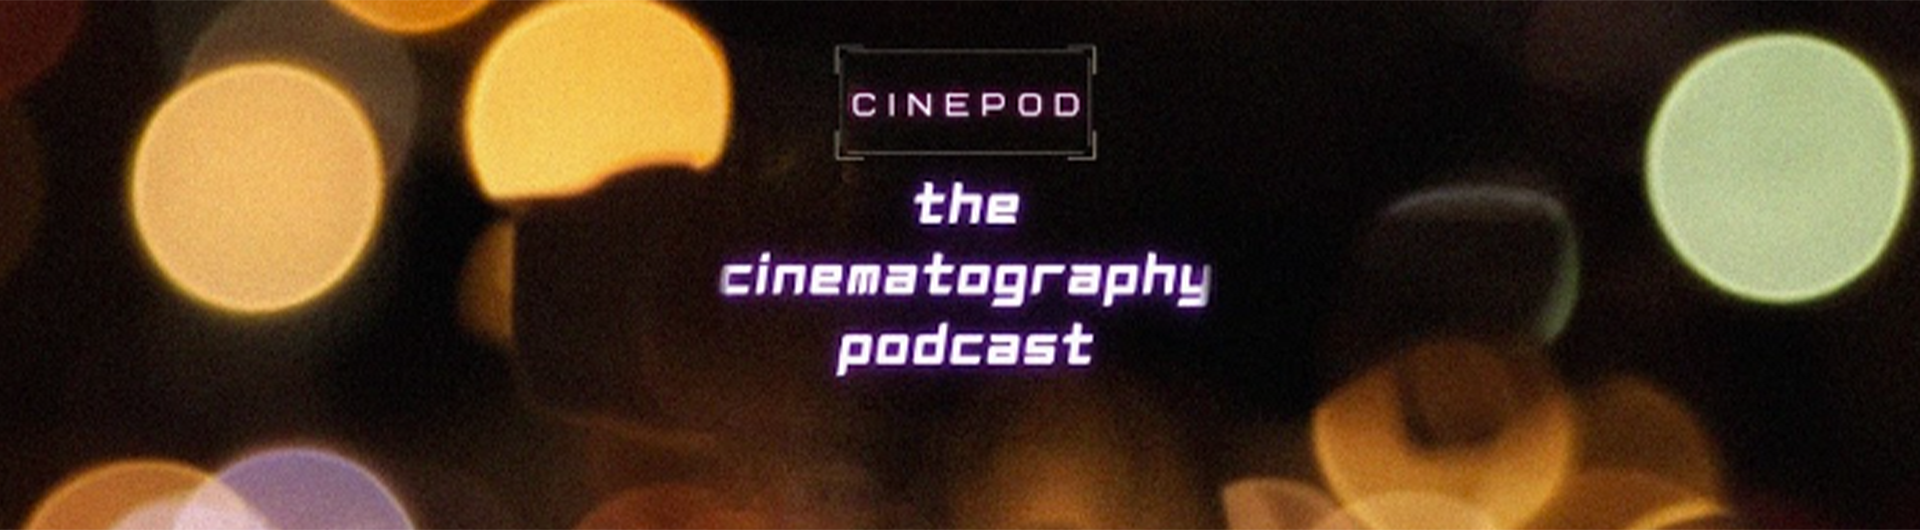 Cinematography Podcast Banner